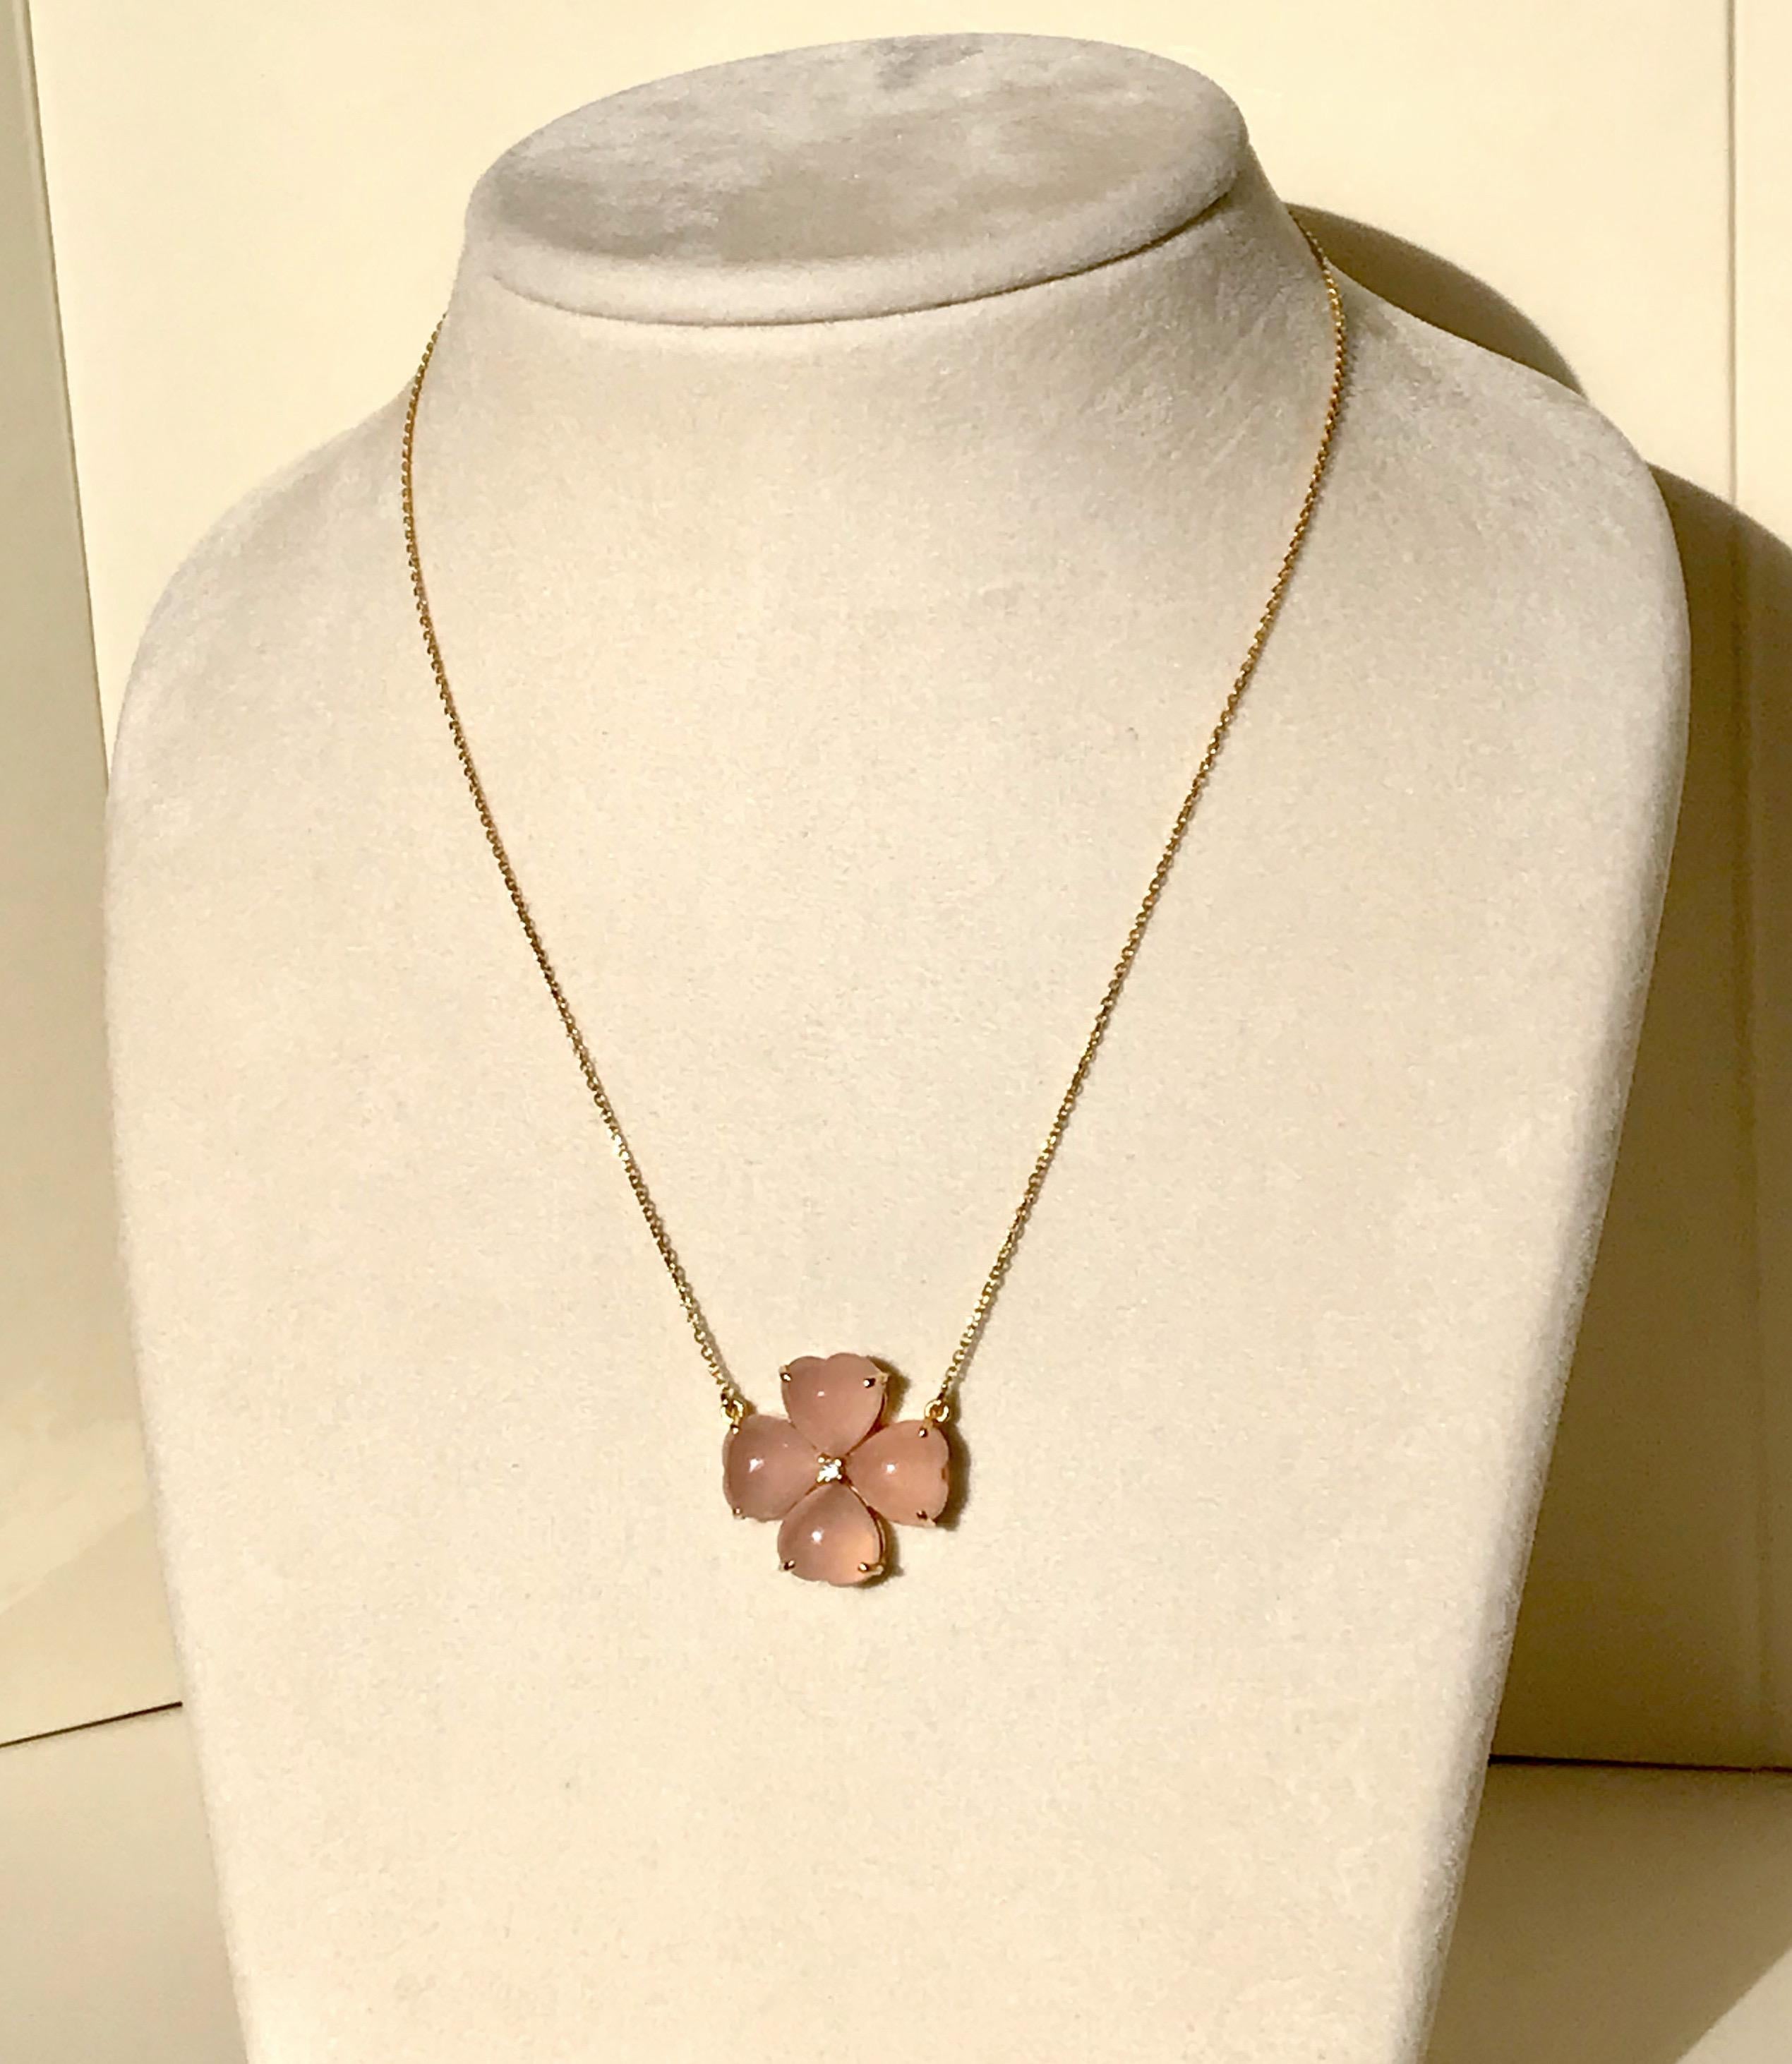 Contemporary Handmade 18 Karat Solid Yellow Gold Pink Chalcedony Clover Pendant Necklace For Sale